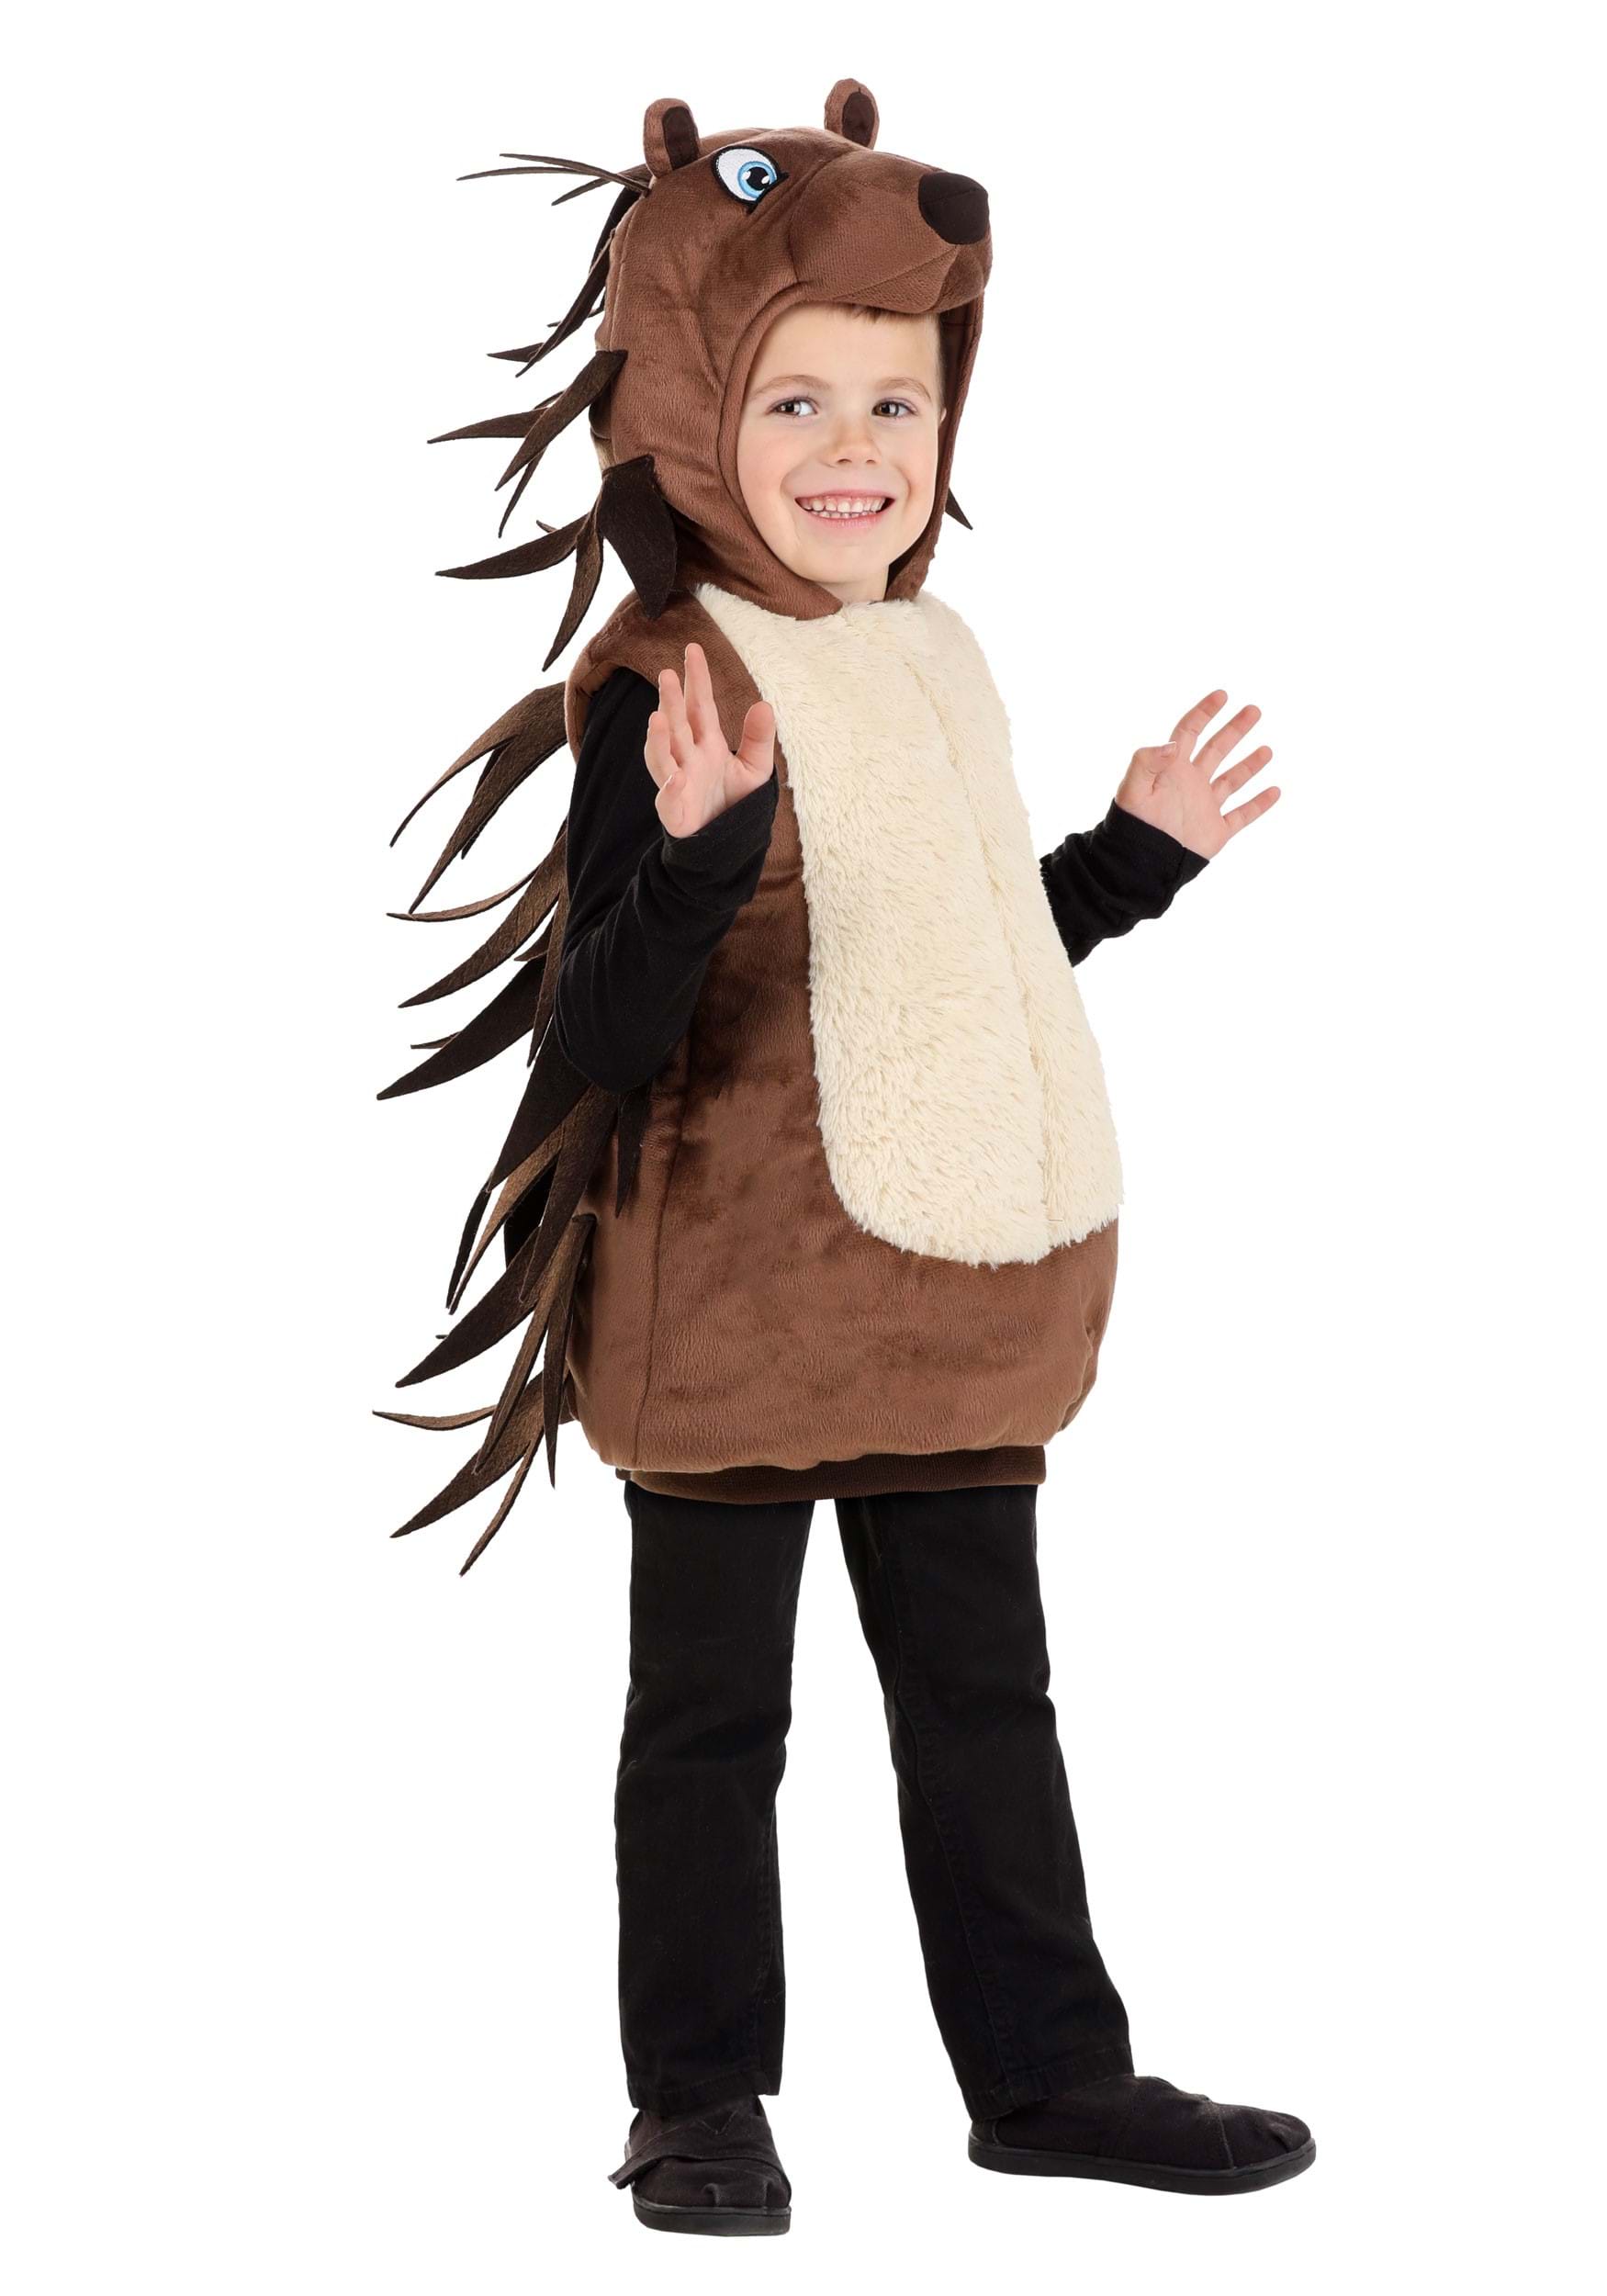 Porcupine Costume For Toddlers